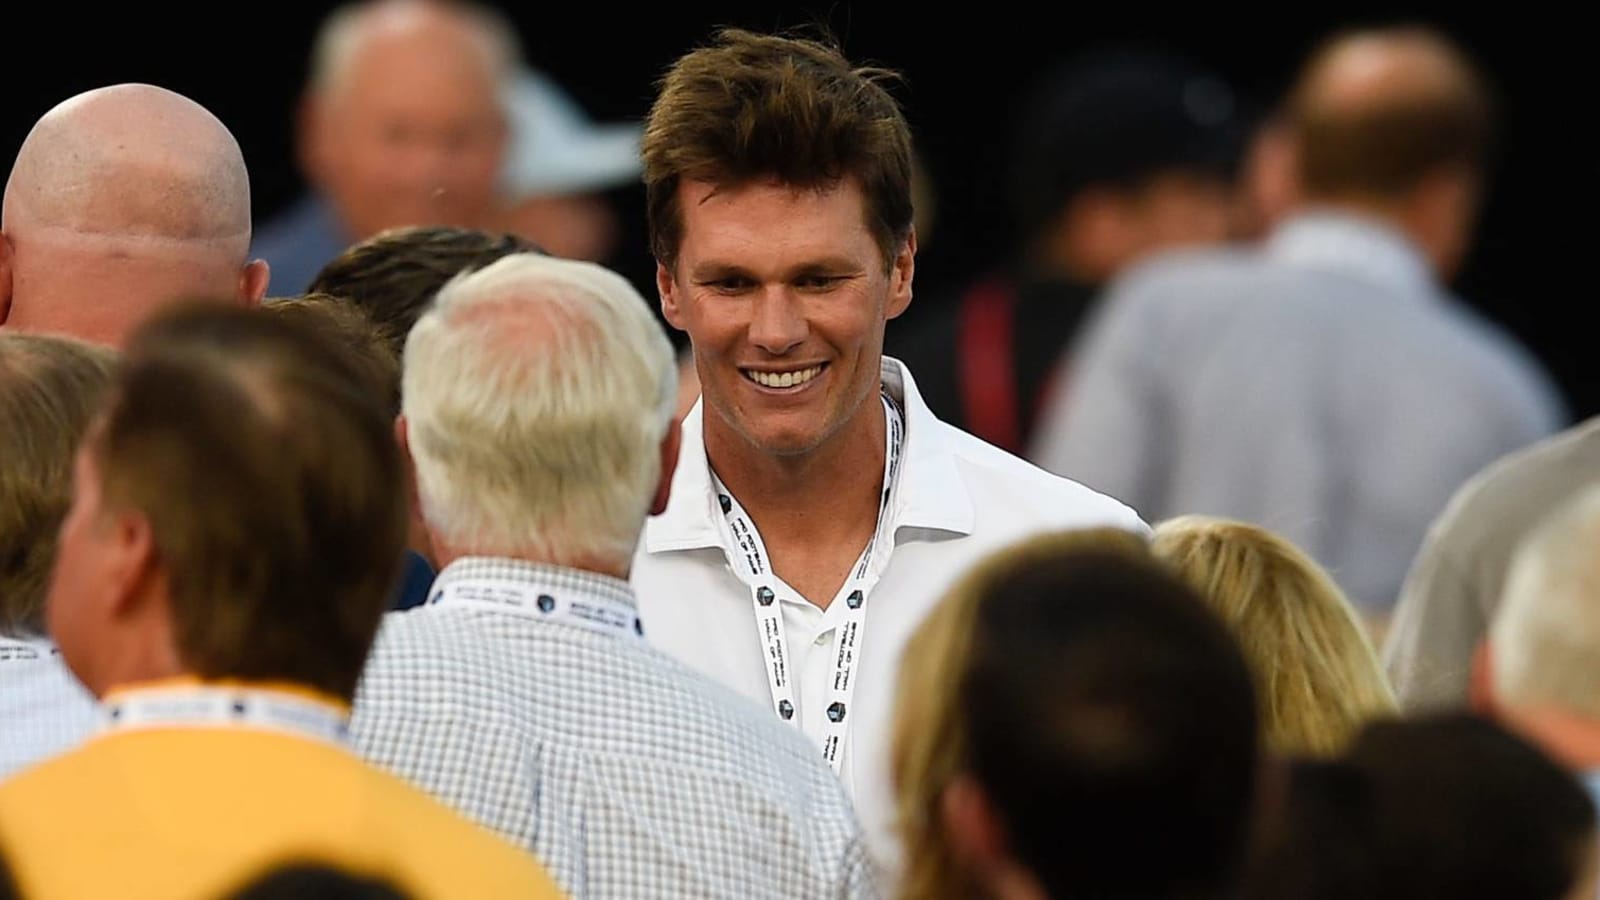 Bruce Arians reacts to Tom Brady getting booed at Hall of Fame